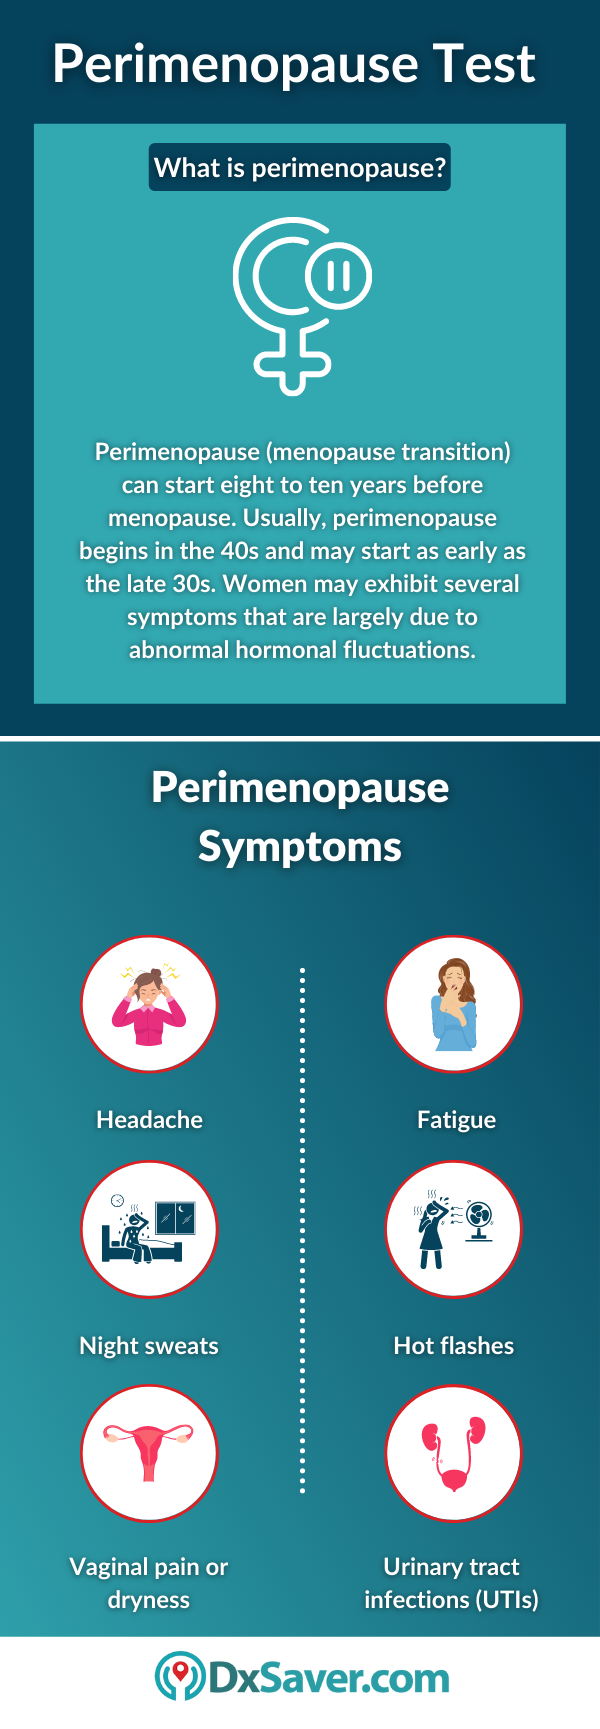 Perimenopause and its Symptoms